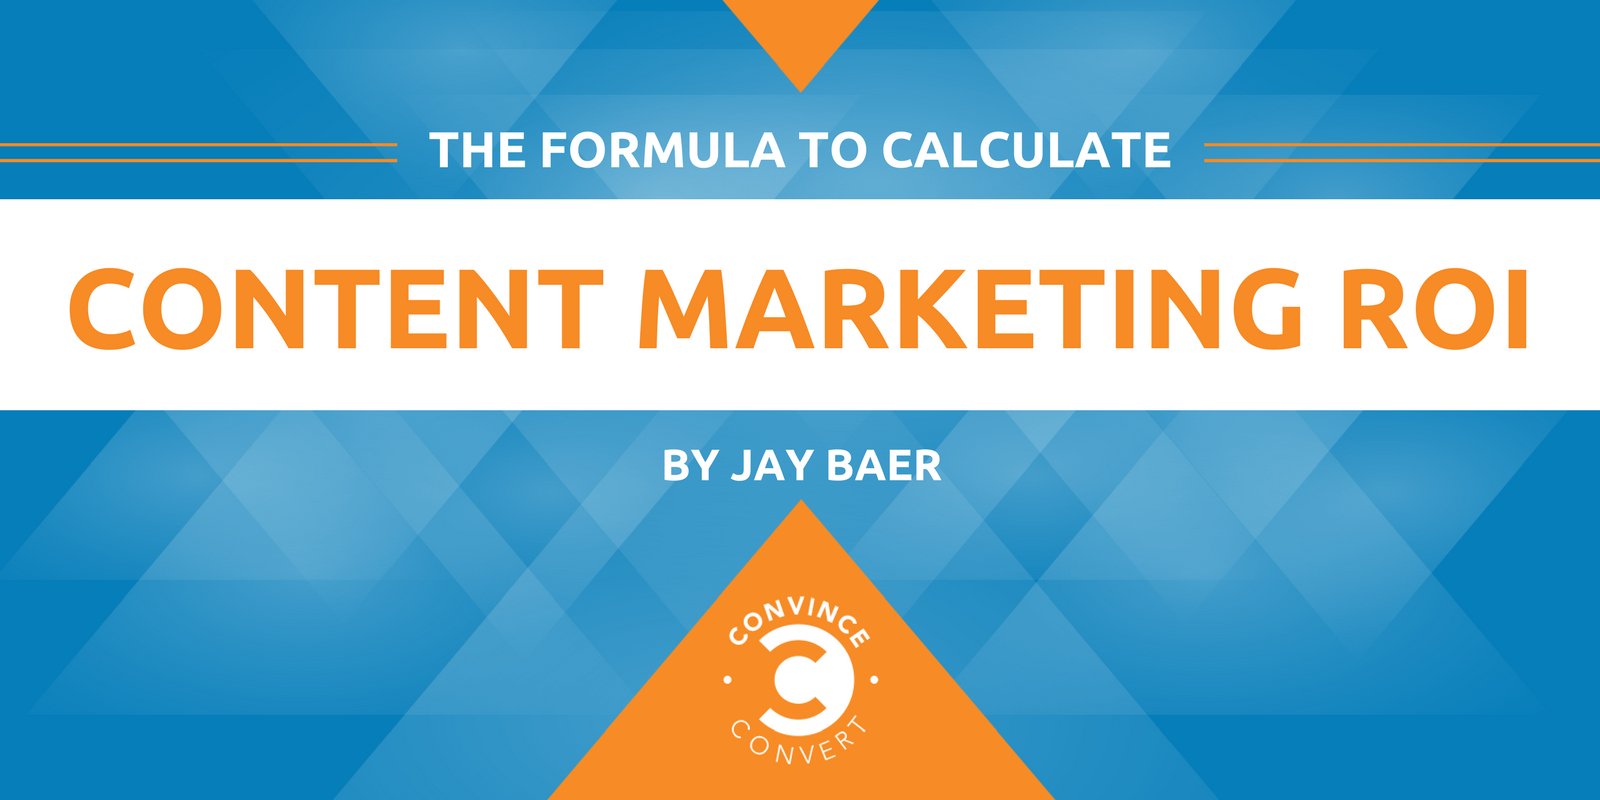 The Formula to Calculate Content Marketing ROI